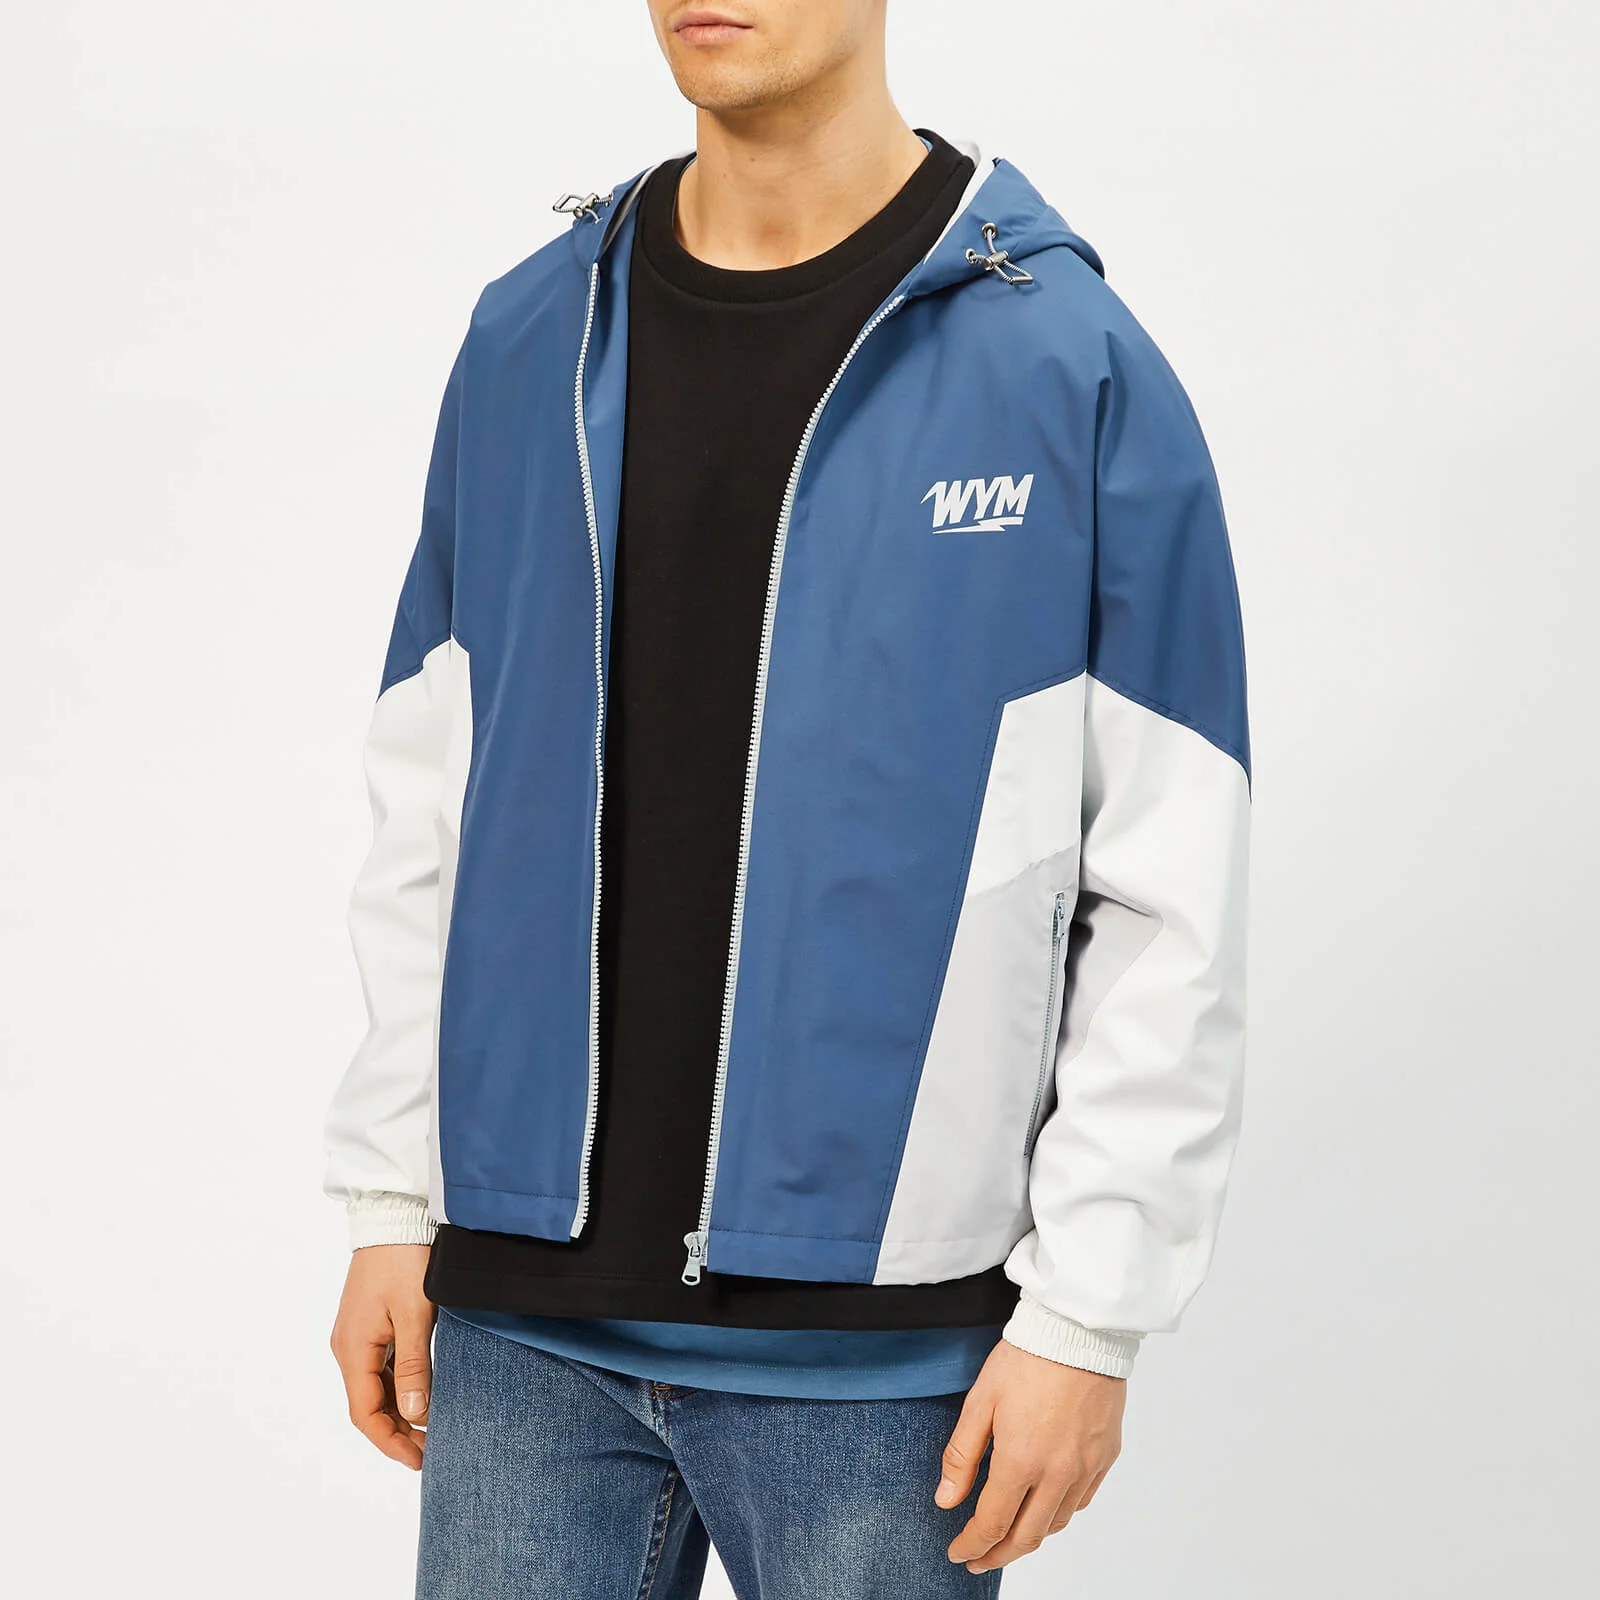 Wooyoungmi Men's Hooded Track Top - Blue Image 1